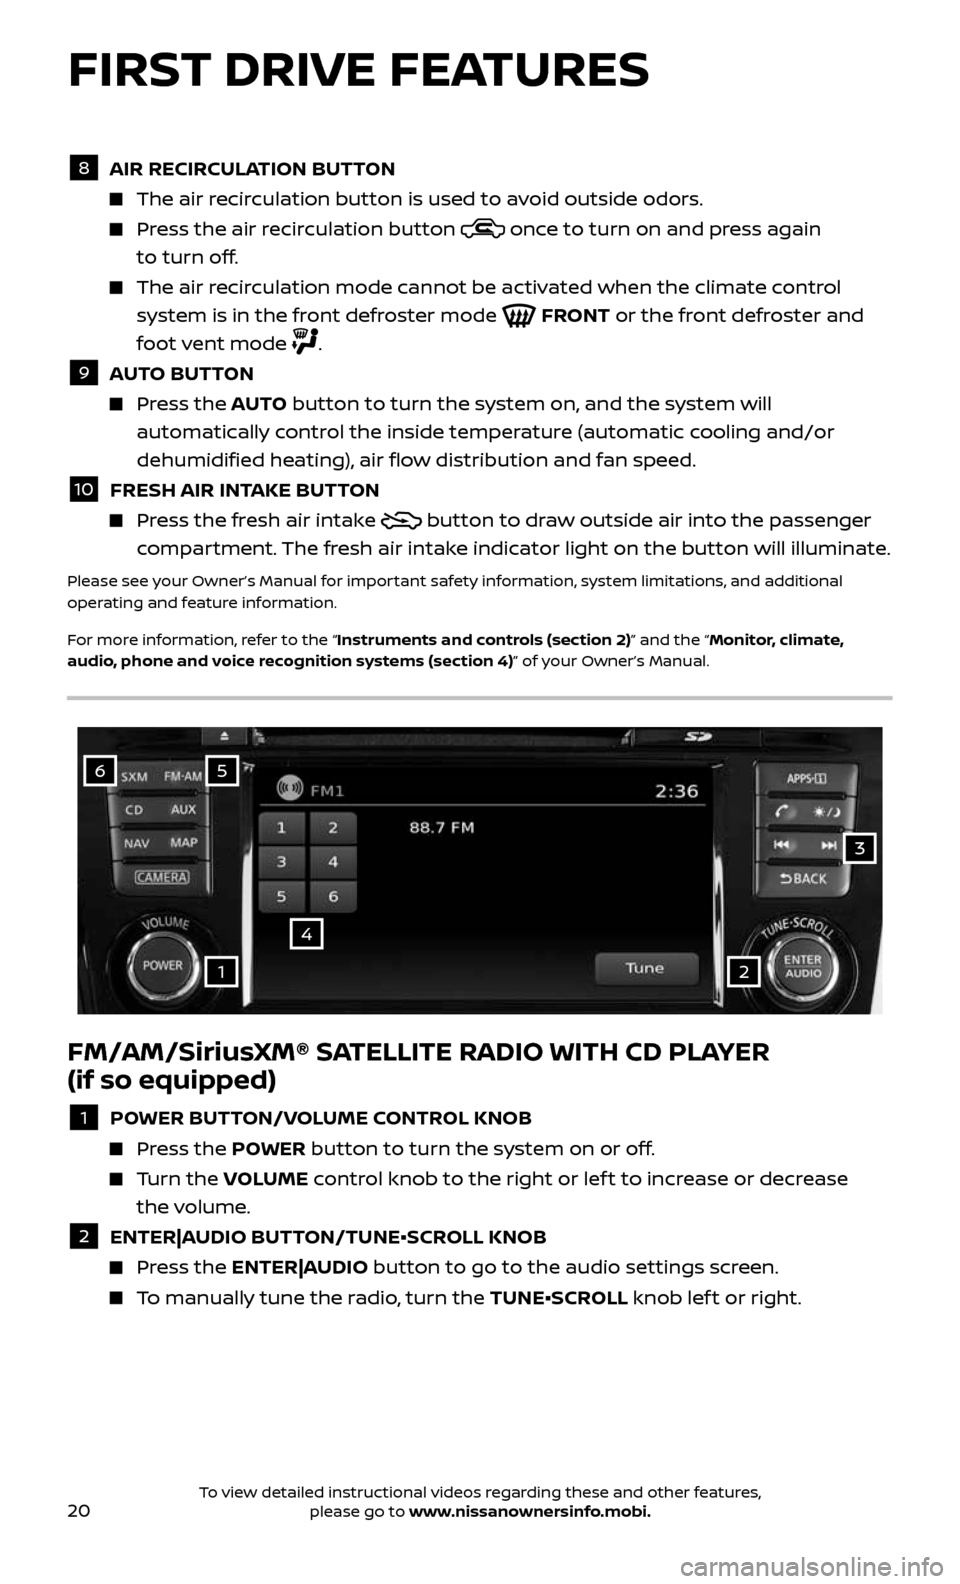 NISSAN ROGUE 2017 2.G Quick Reference Guide 20
FM/AM/SiriusXM® SATELLITE RADIO WITH CD PLAYER  
(if so equipped)
1 POWER BUTTON/VOLUME CONTROL KNOB
   Press the POWER button to turn the system on or off.
     Turn  the VOLUME control knob to t